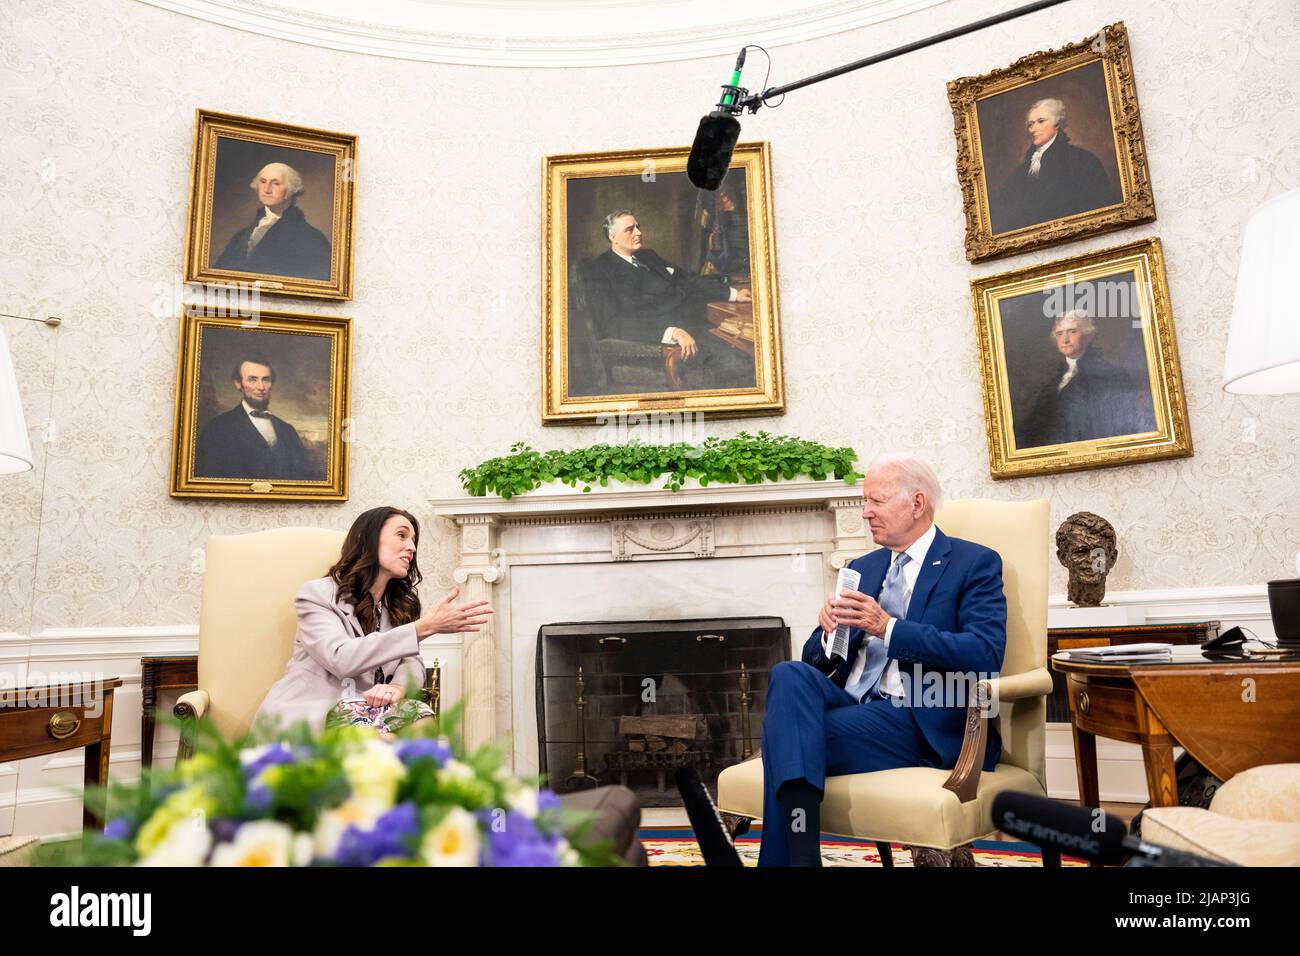 Washington, US, May 31, 2022. President Joe Biden meets with Jacinda Ardern, Prime Minister of New Zealand in the Oval Office, Tuesday, May 31, 2022. ( Photo by Doug Mills/The New York Times)United States President Joe Biden meets with, Prime Minister Jacinda Ardern of New Zealand in the Oval Office of the White House in Washington, DC, Tuesday, May 31, 2022. Credit: Doug Mills/Pool via CNP /MediaPunch Stock Photo